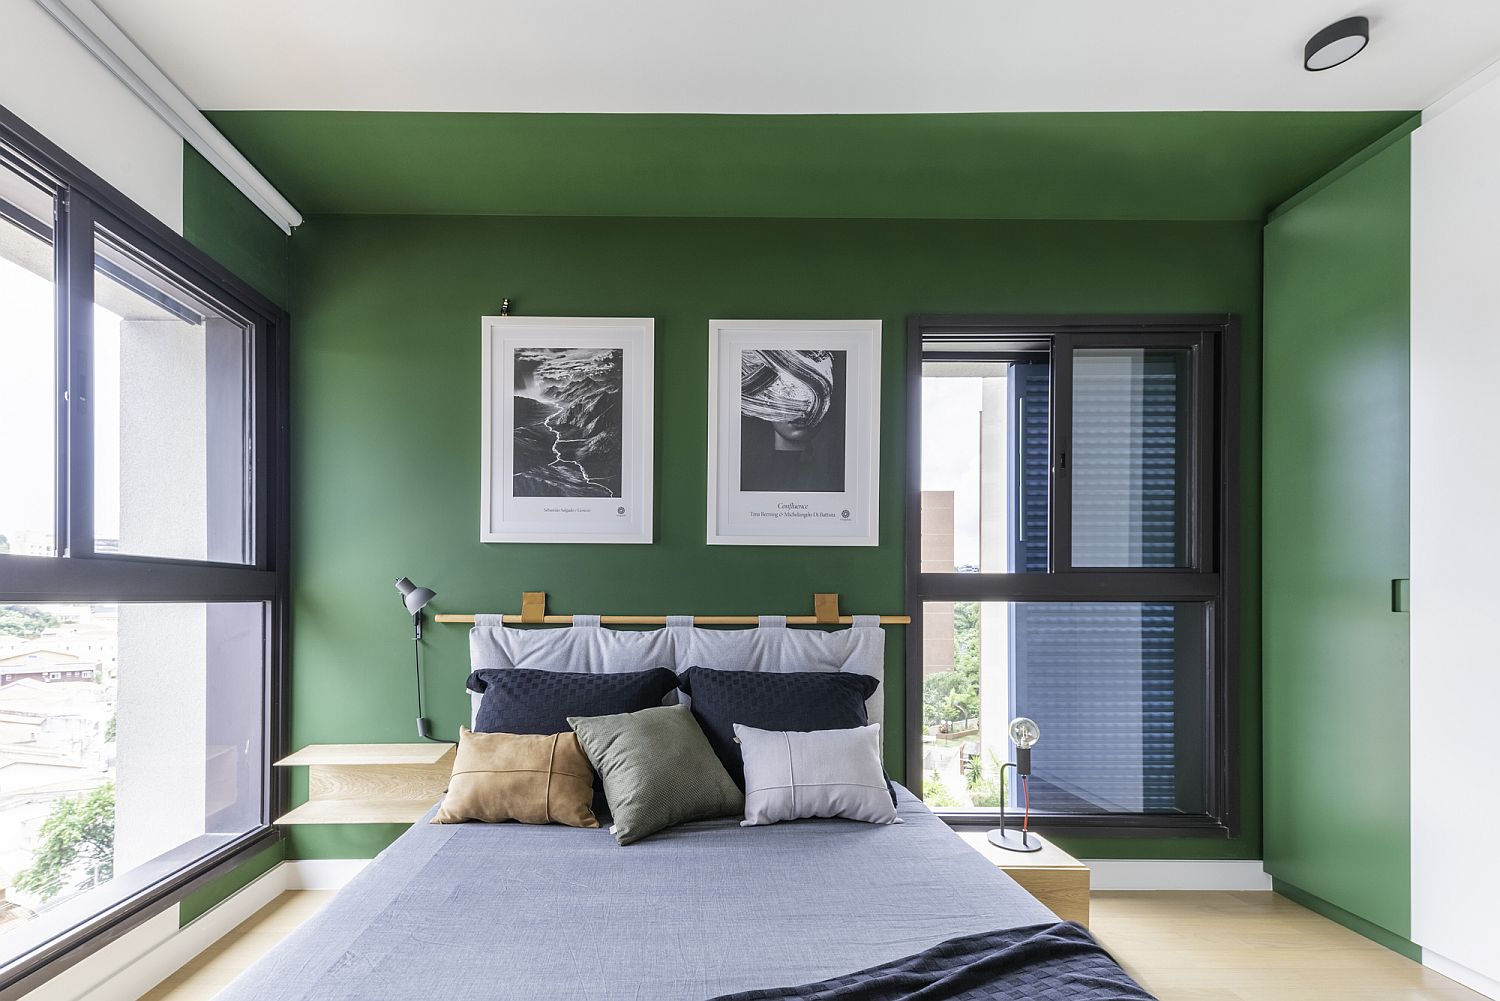 Exquisite-modern-bedroom-with-green-accent-wall-and-comfy-decor-12417